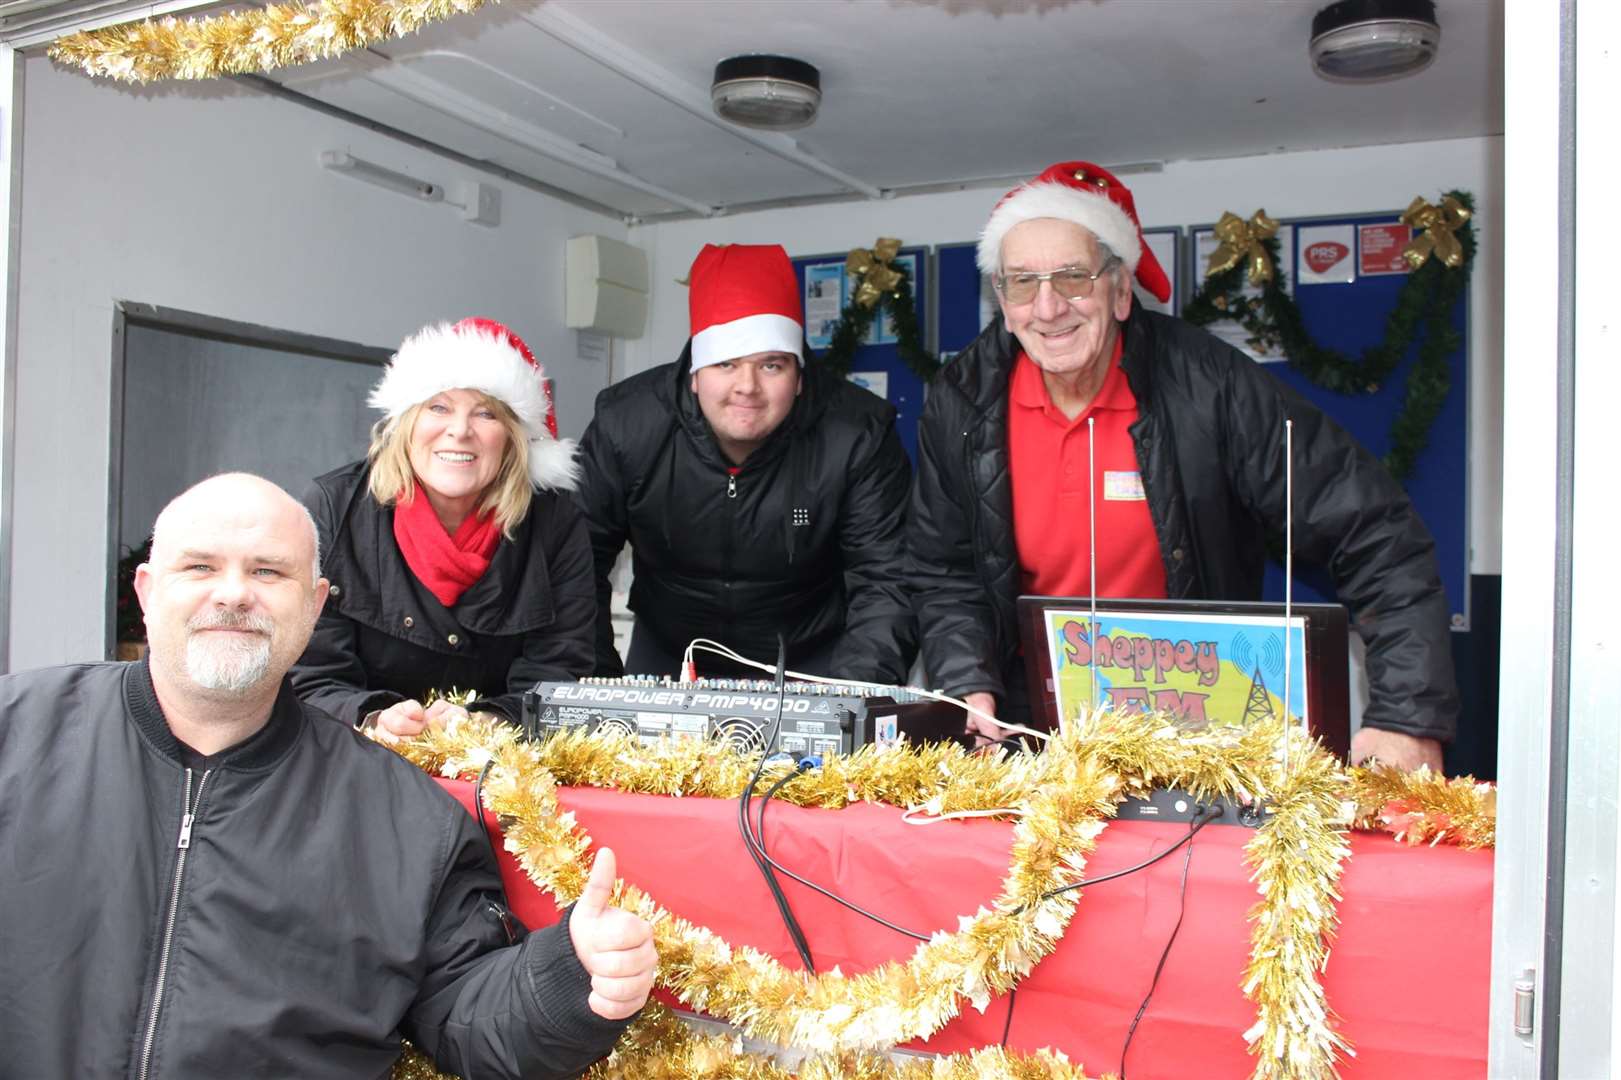 Noel Pritchard, right, with the Sheppey FM roadshow crew at a Sheerness Christmas lights switch-on